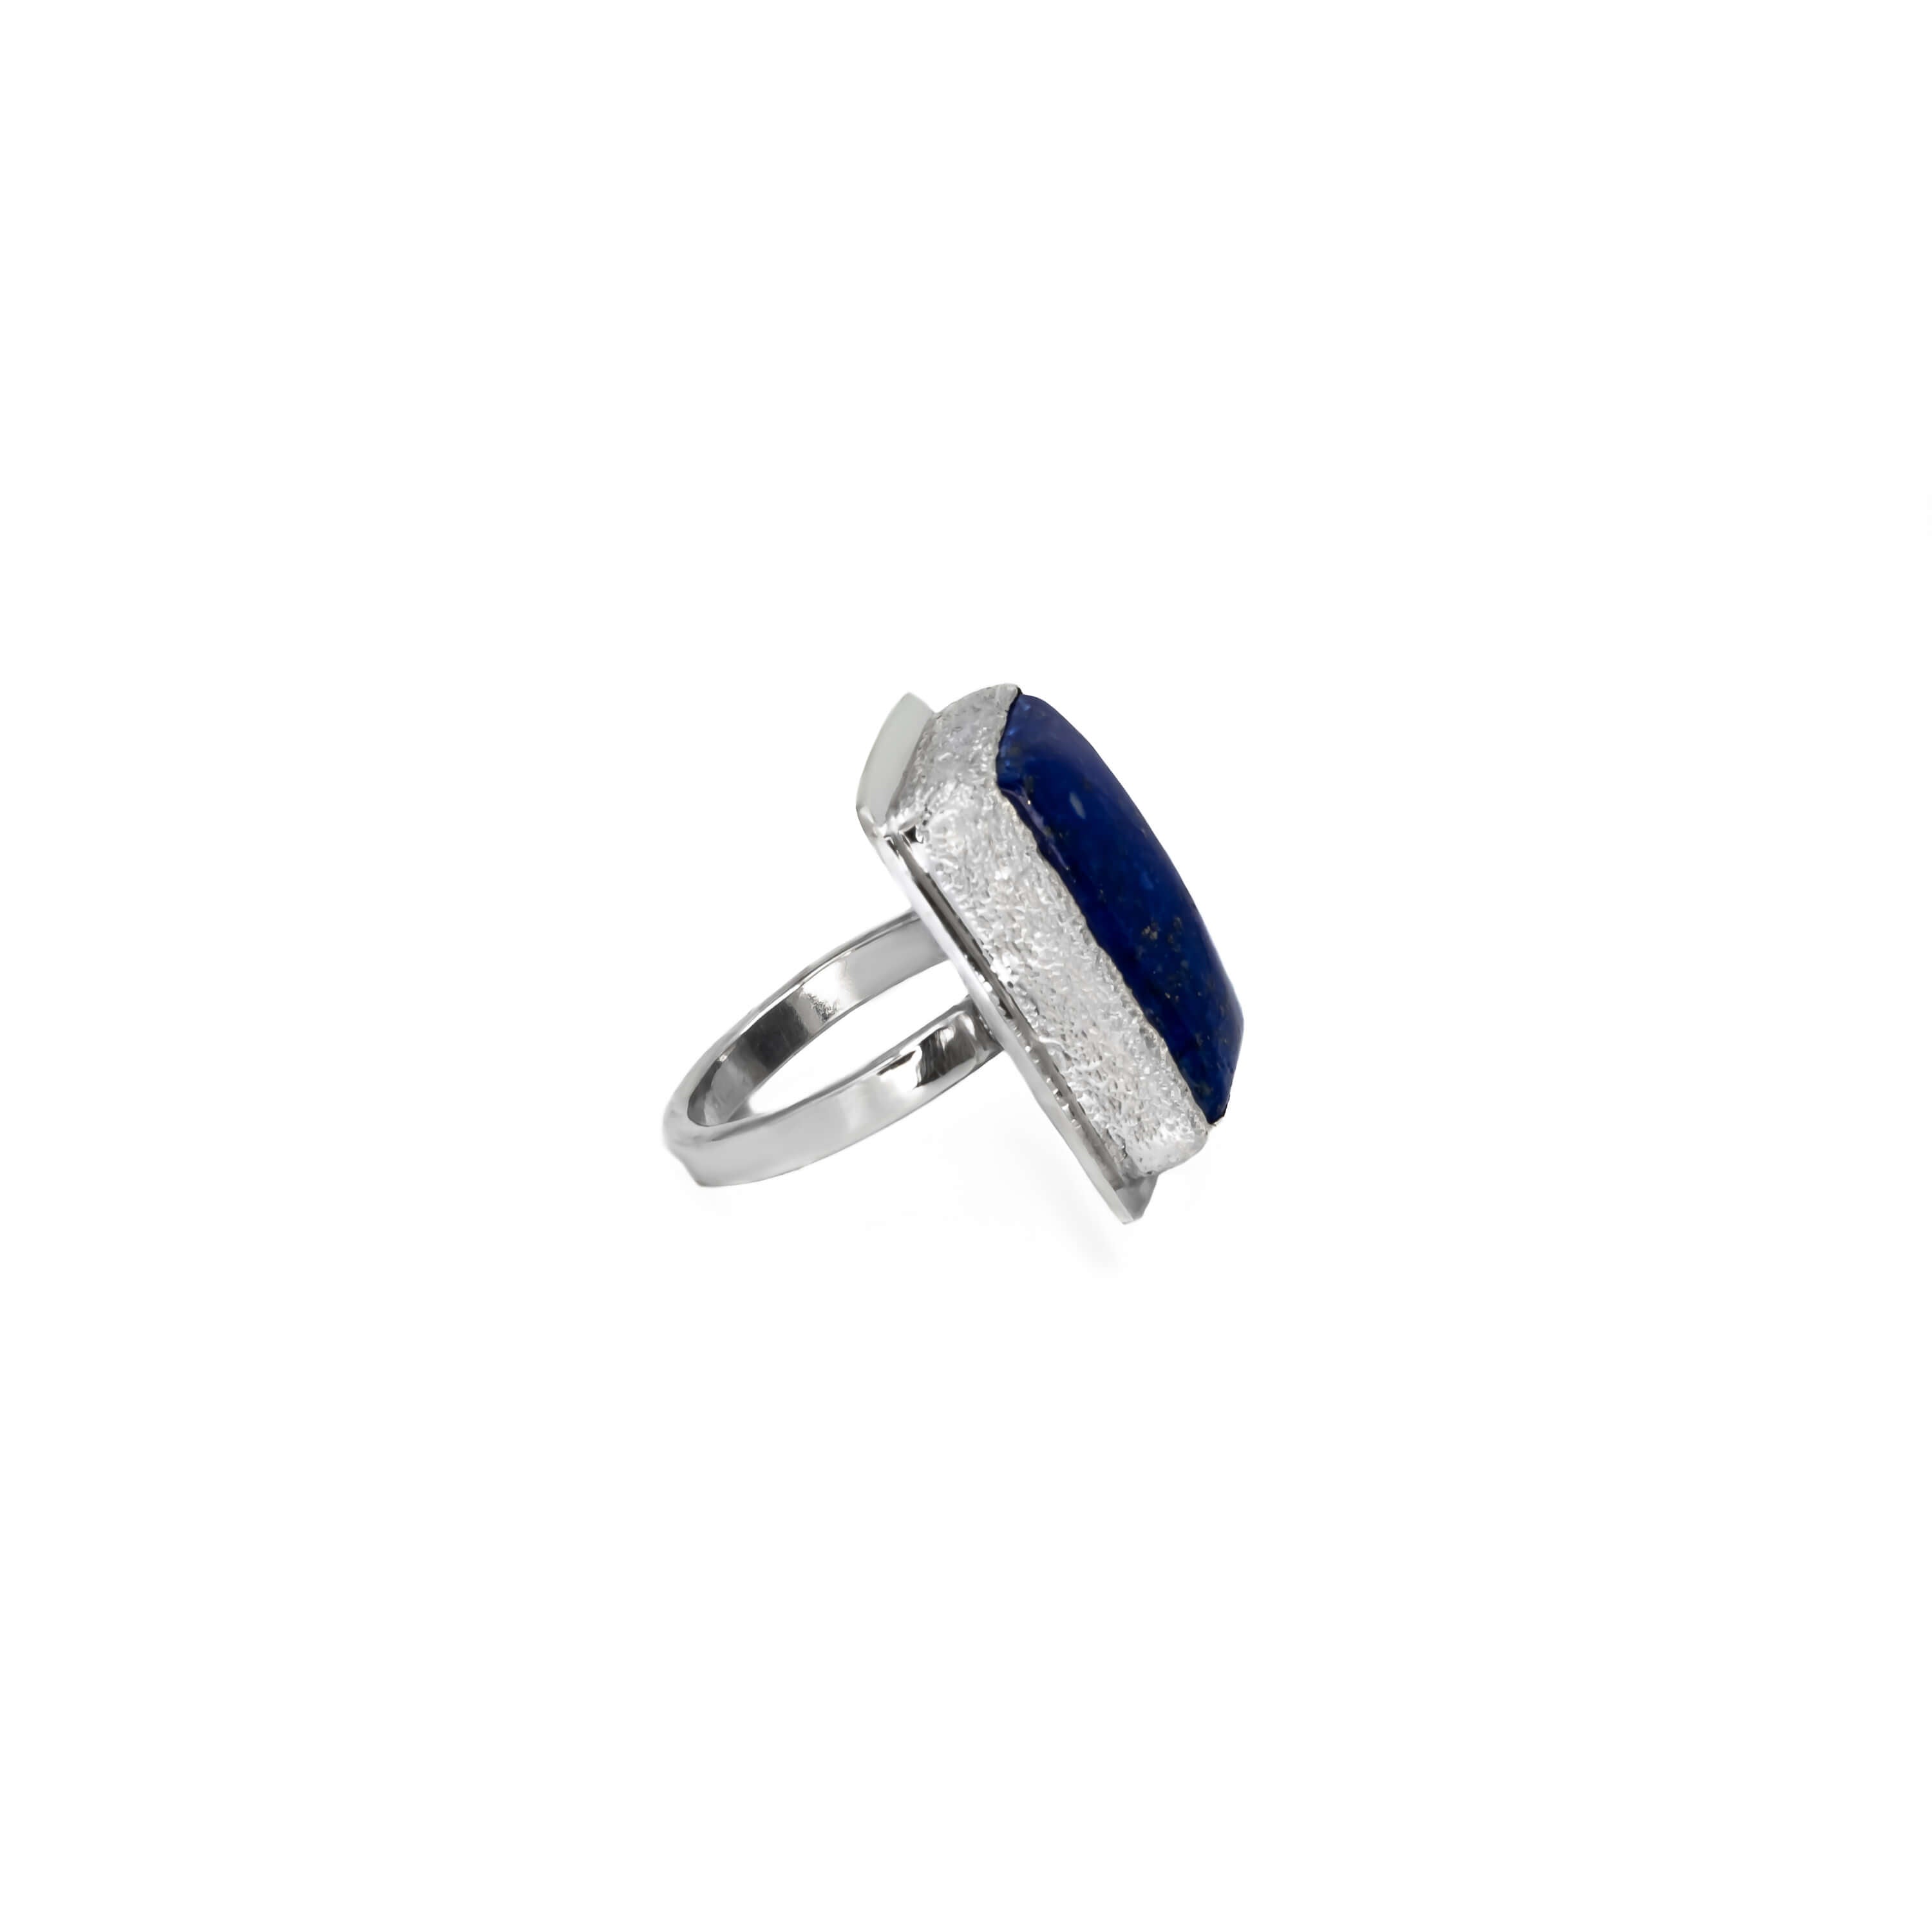 Lapis-lazuli-large-cocktail-ring-sterling-silver-side-view